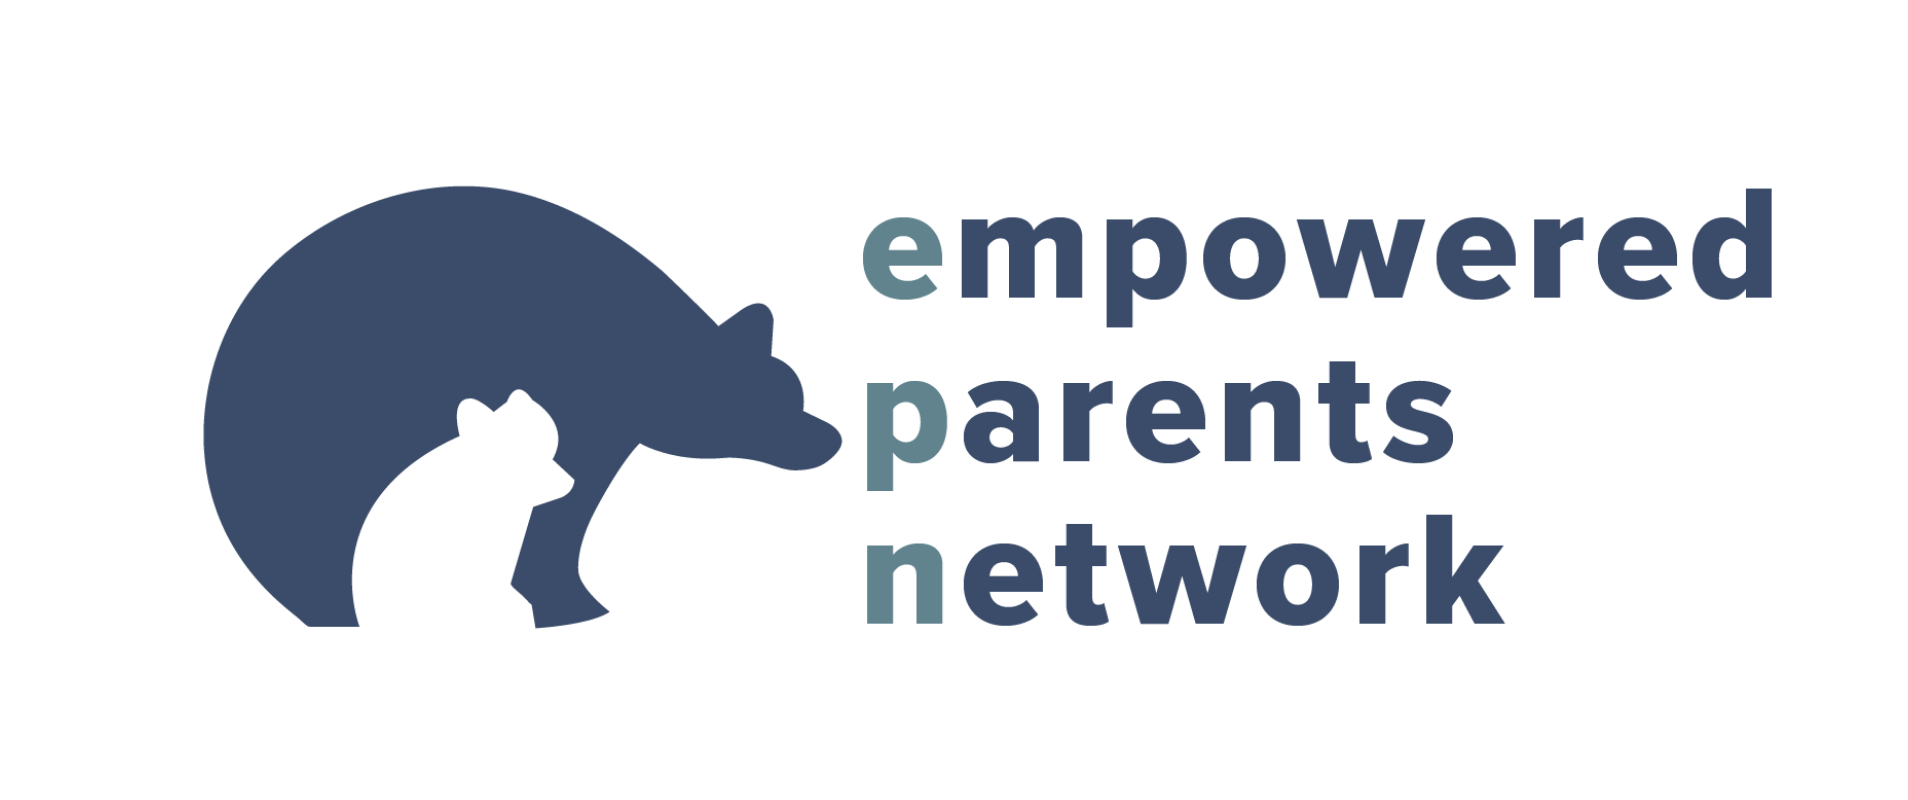 DISH empowered parents network employee resource group best workplace for parents 